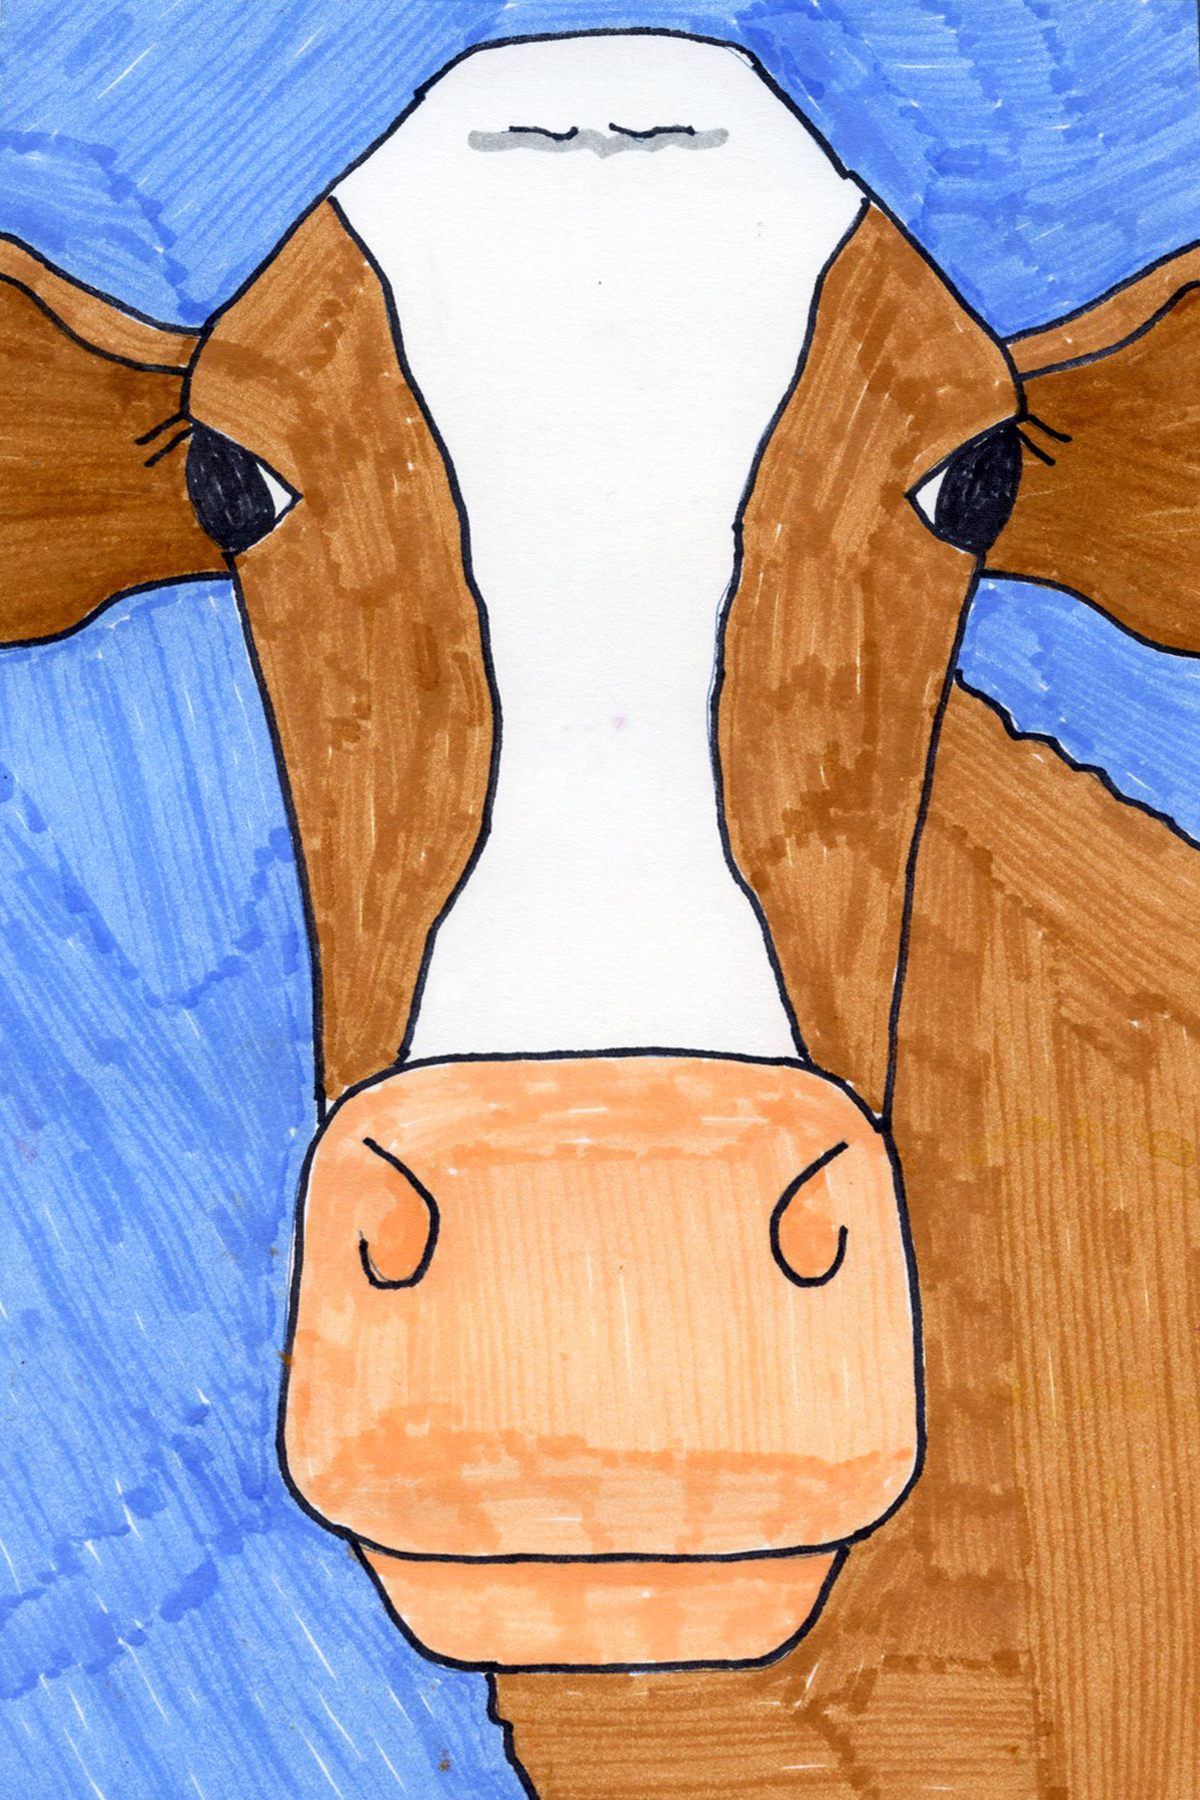 Cows Face Drawing Intricate Artwork